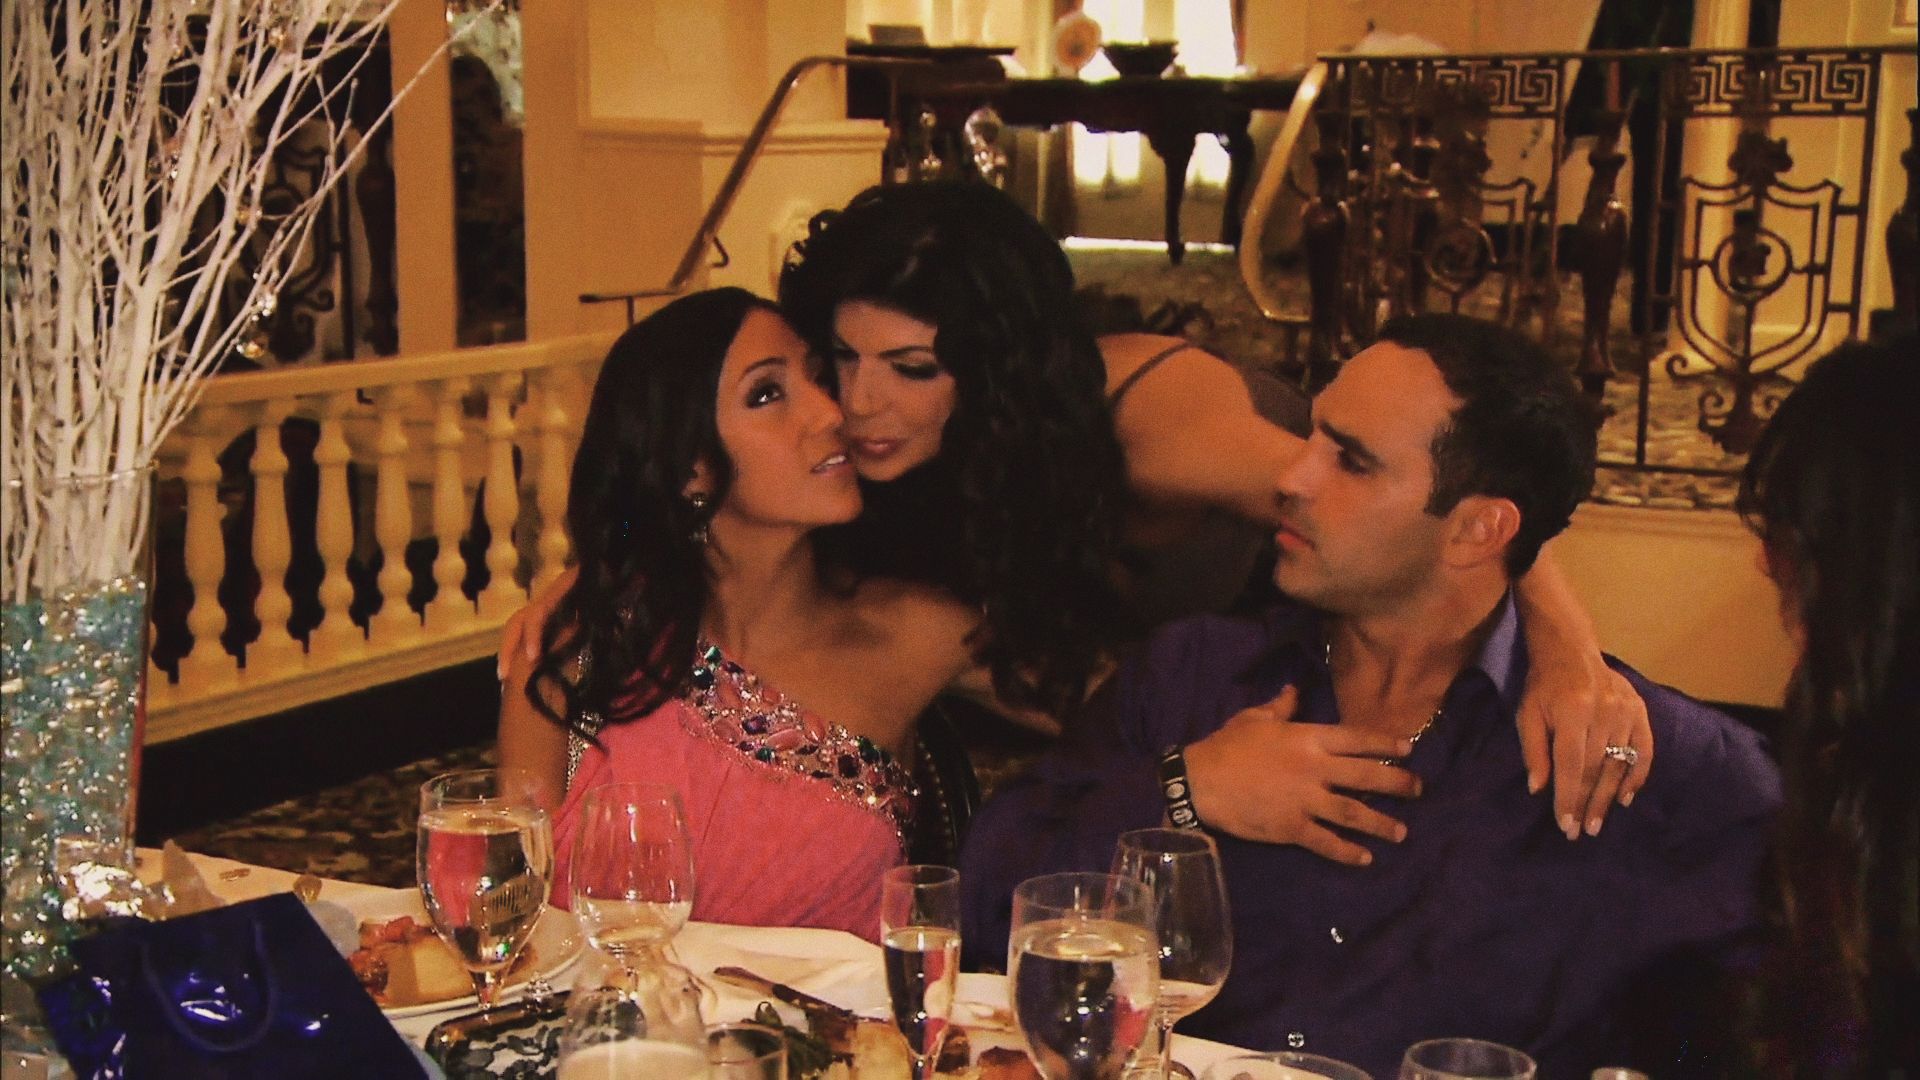 RHONJ The Real Housewives of New Jersey S3E1 saison 3 épisode 1 In the Name of the Father